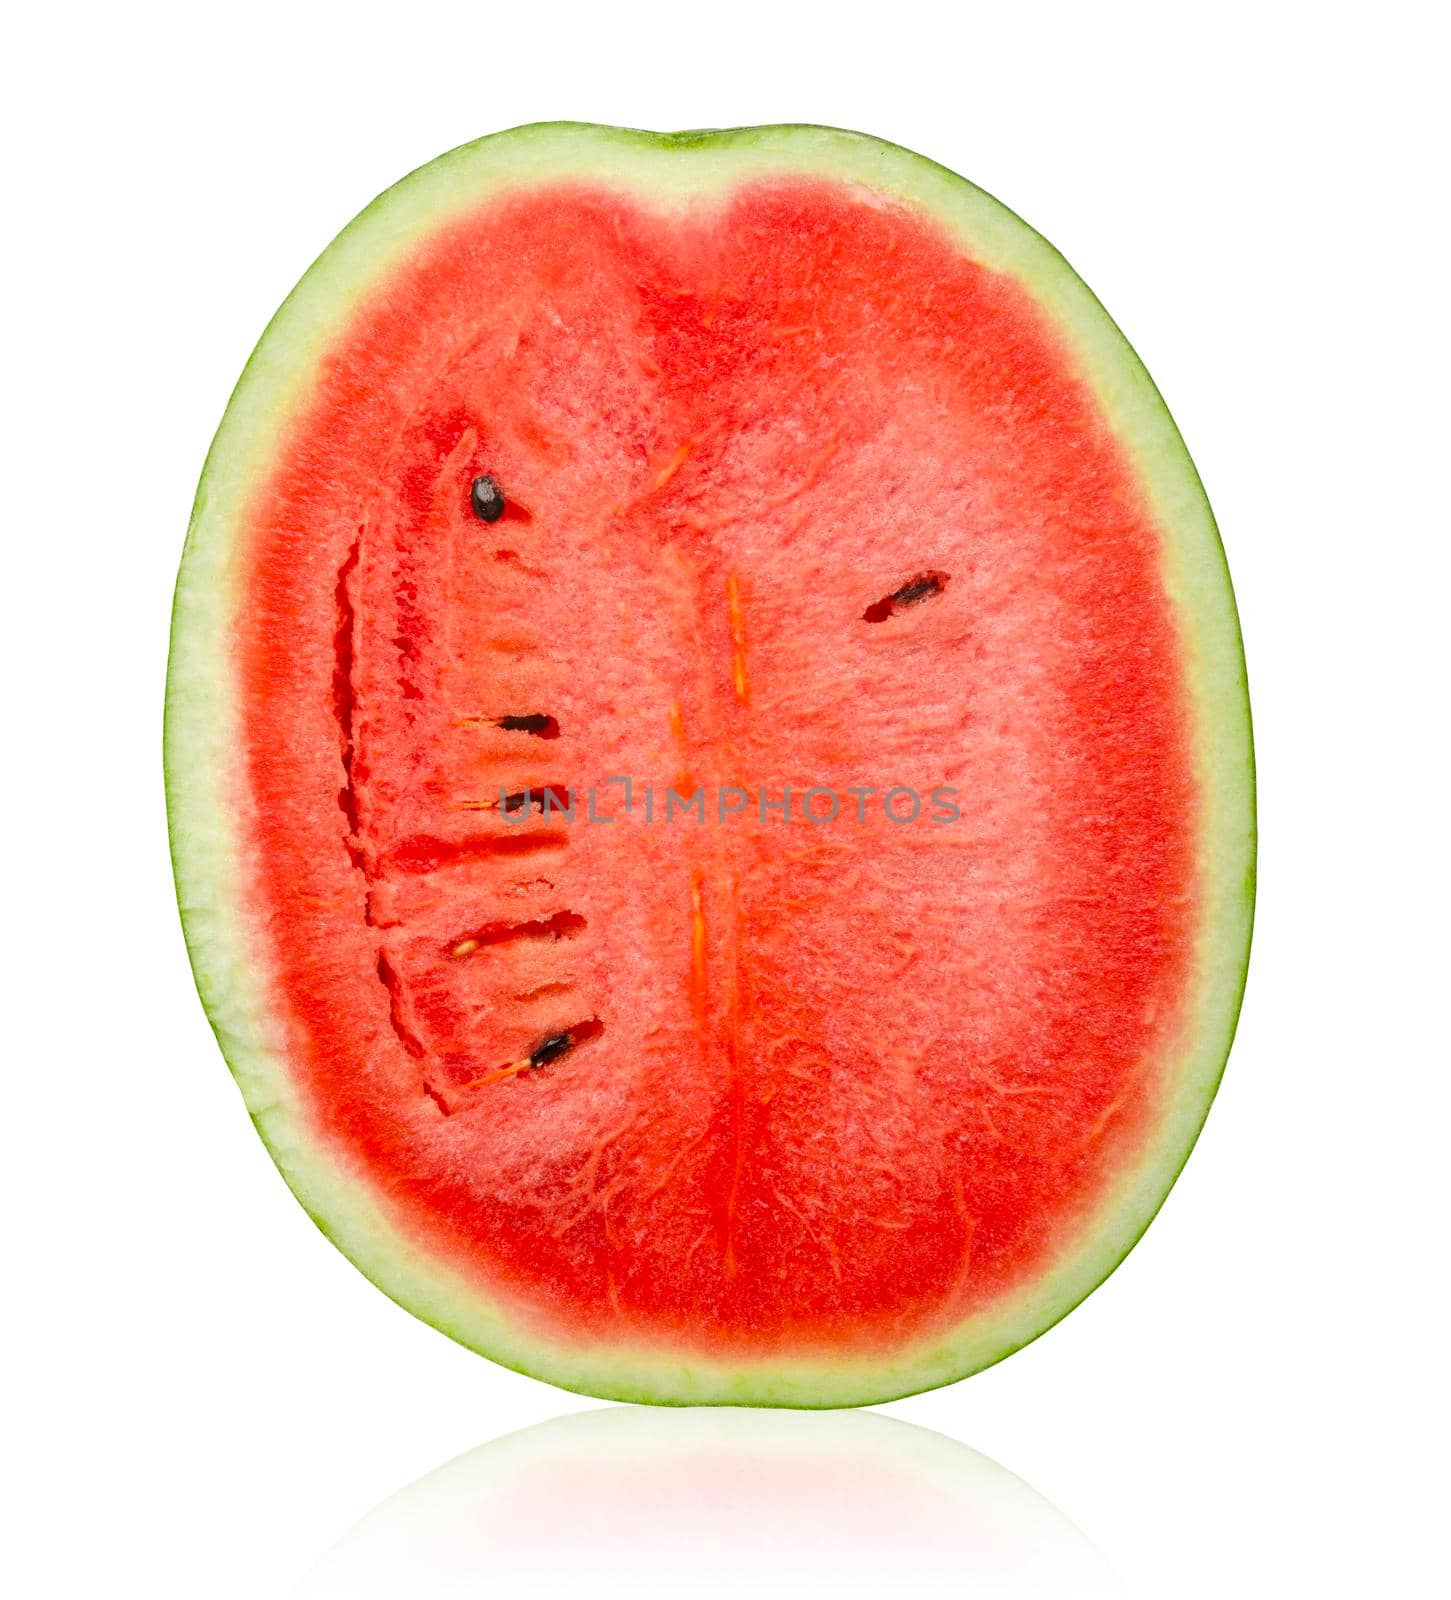 Watermelon red fruit isolated on white background, save clipping path.